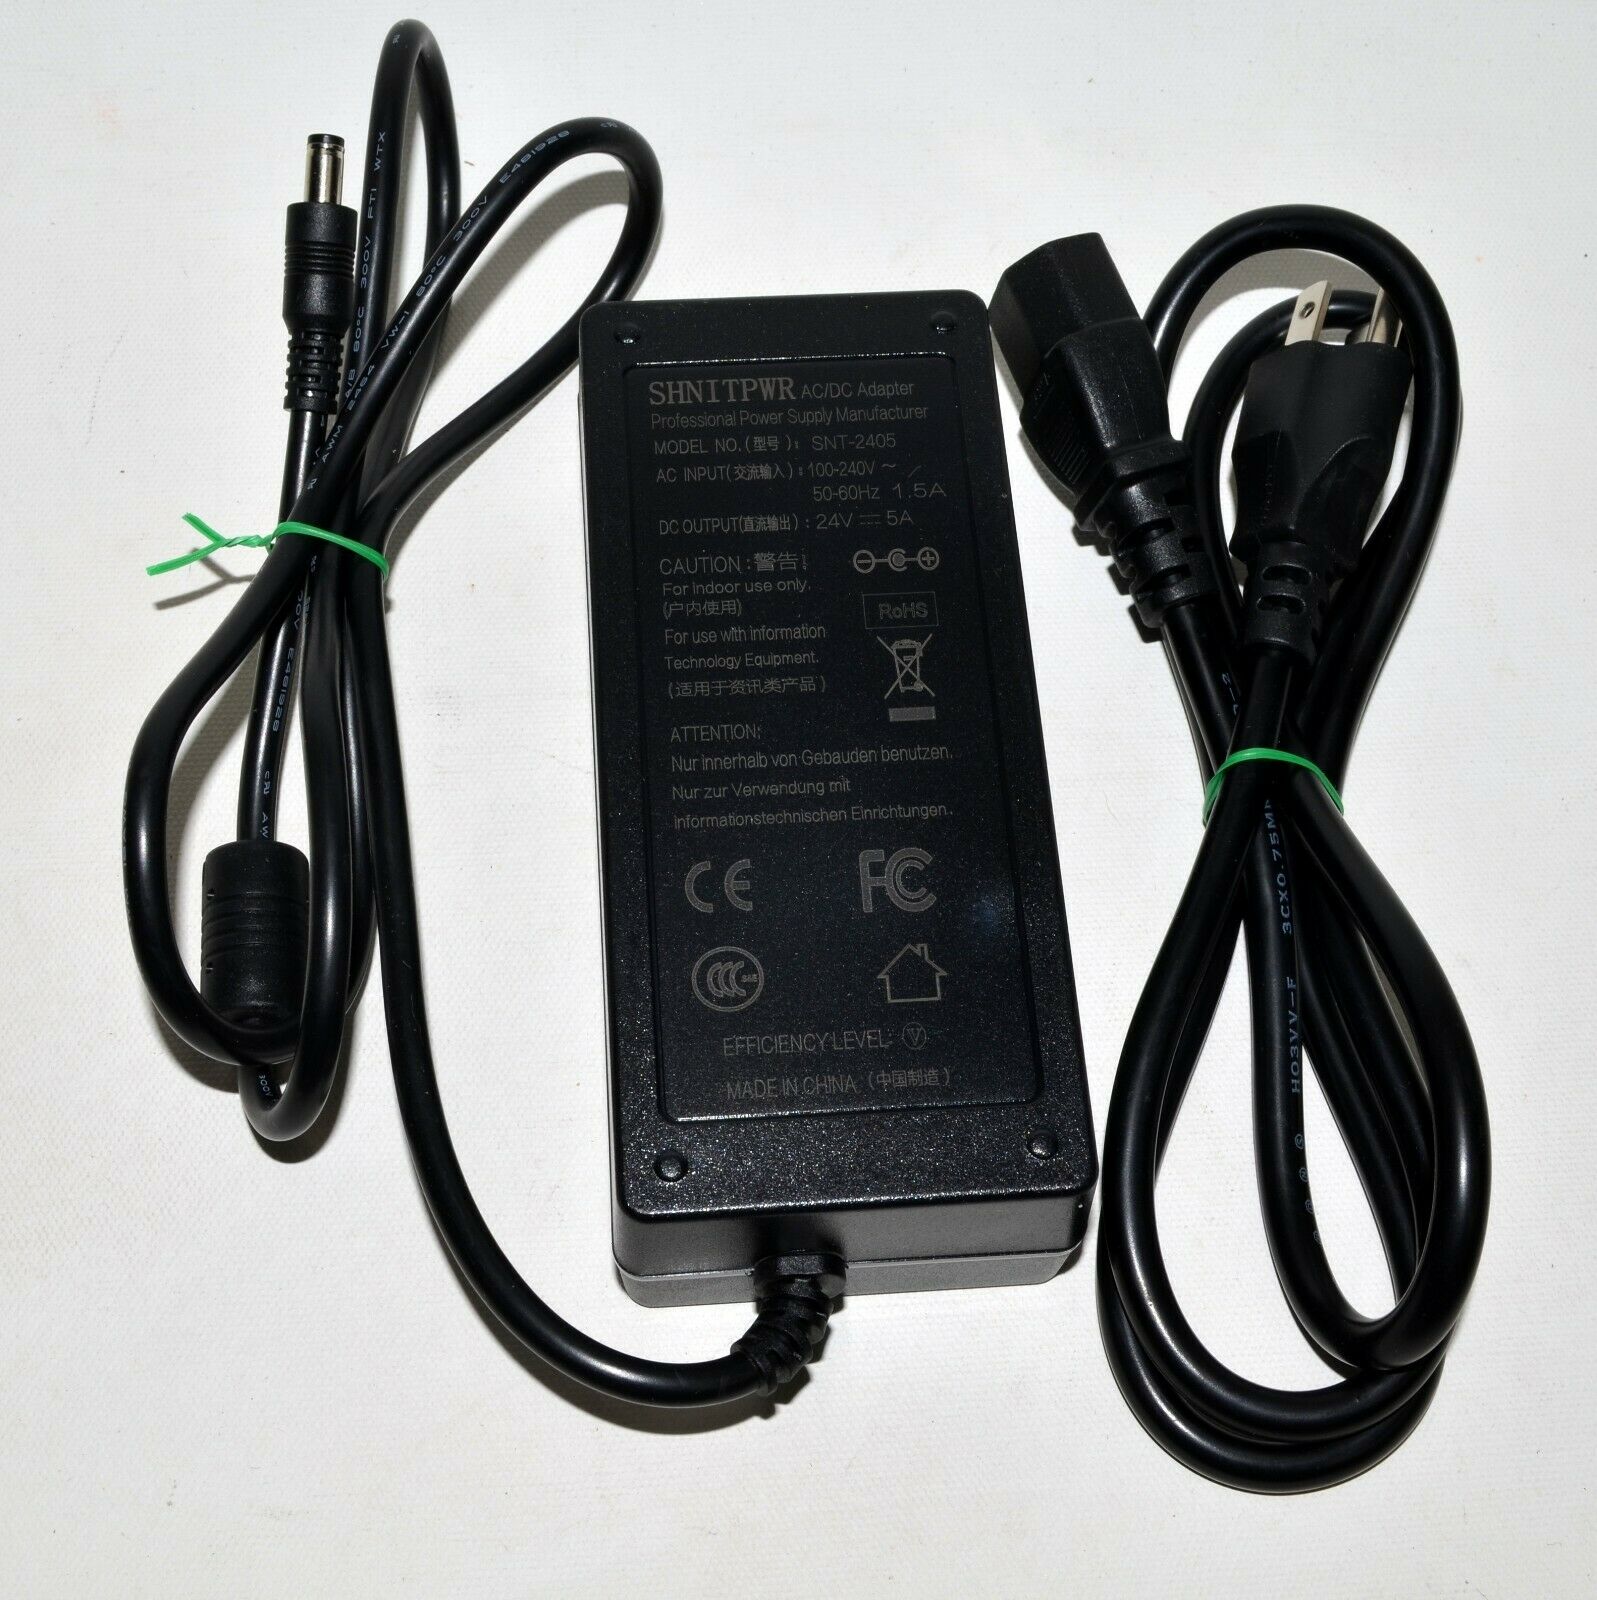 Shnitpwr ACDC Power Adapter Supply SNT-2405 24V 5A Compatible Brand: Universal Brand: Shnitpwr Type: AC/DC Adapter - Click Image to Close